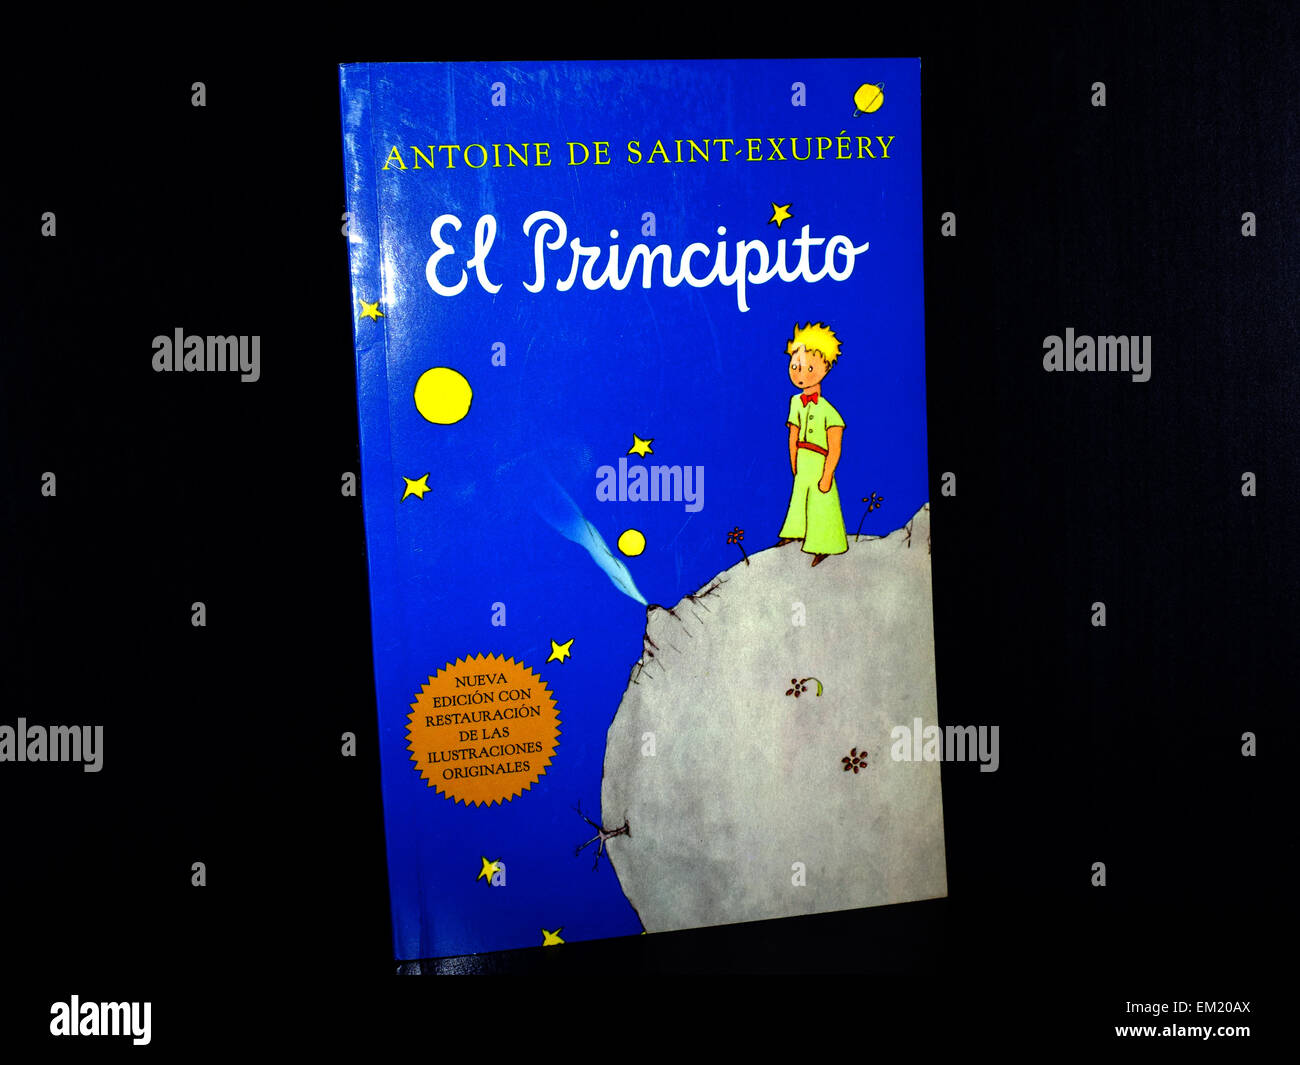 The front cover of a Spanish translation of The Little Prince book photographed against a black background. Stock Photo